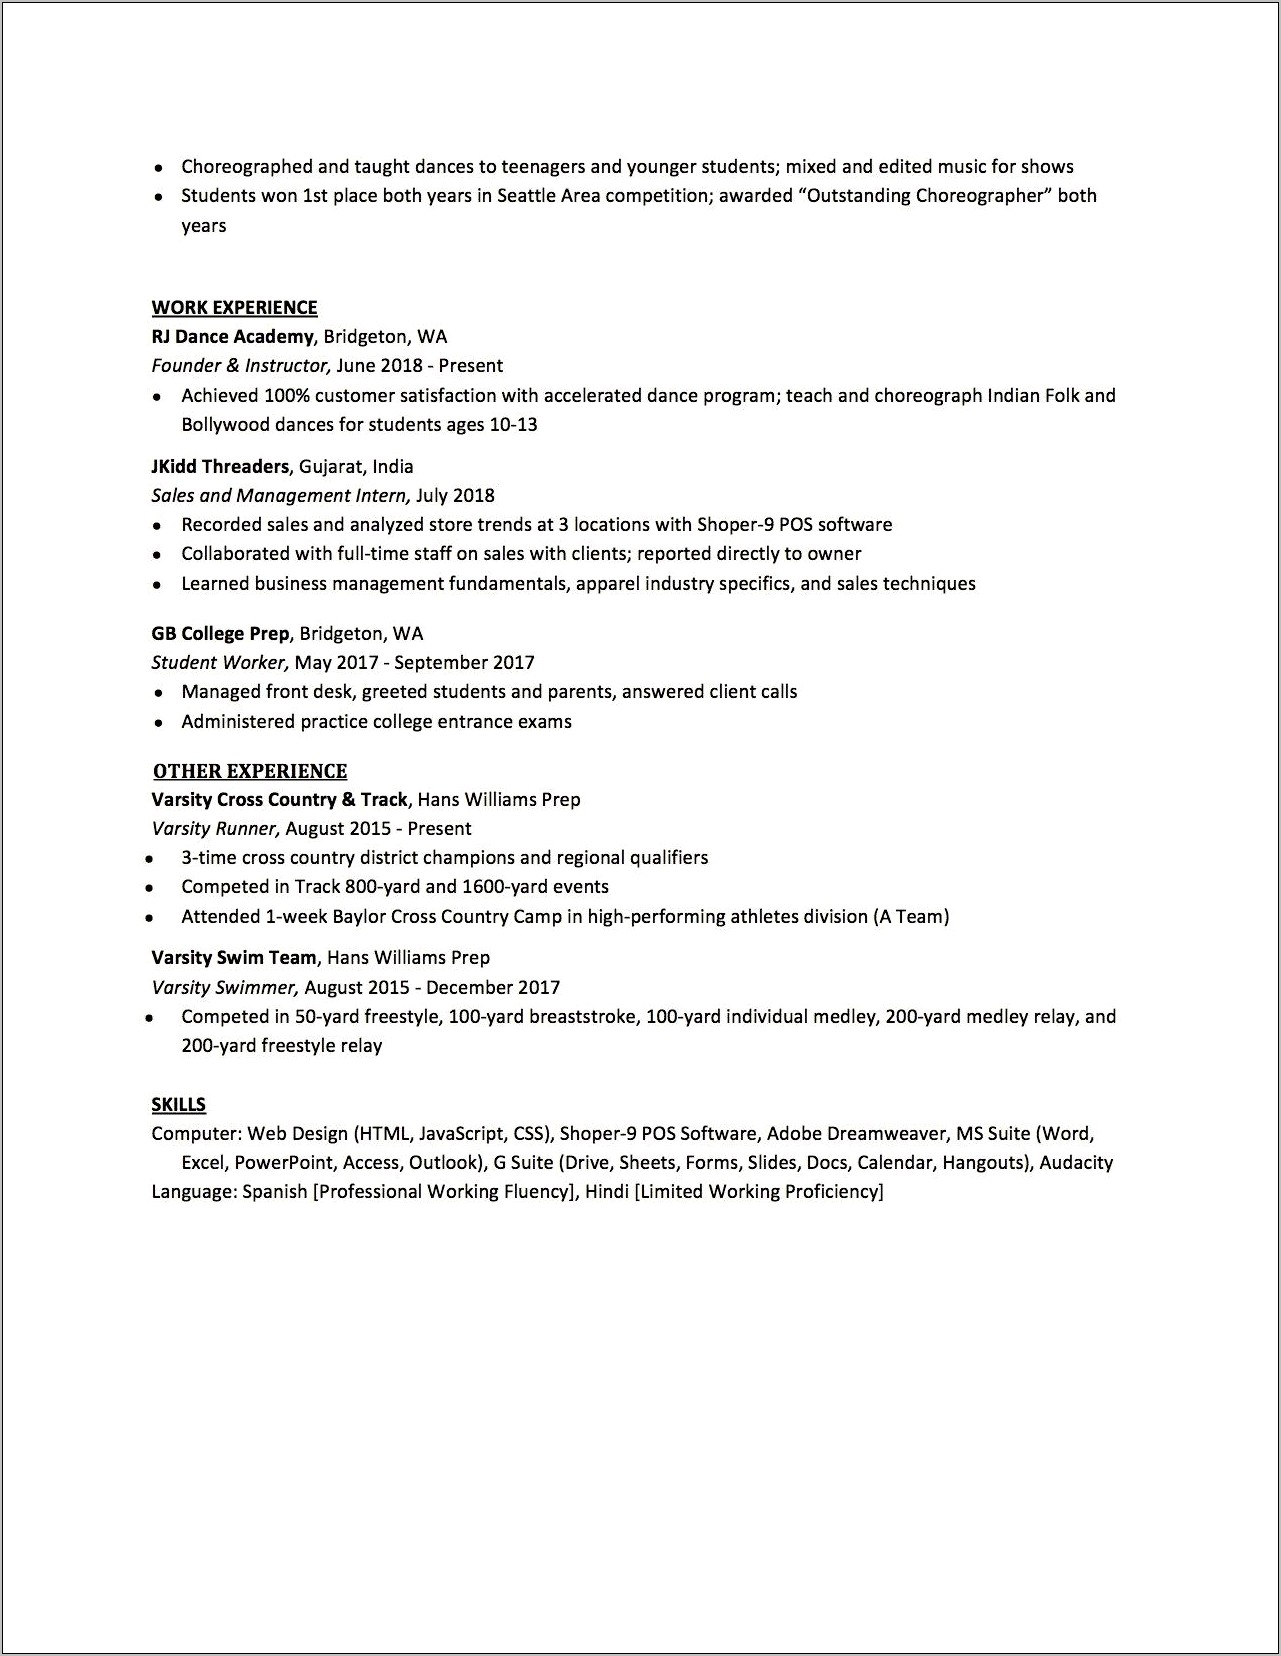 Should A Professional Resume Include High School